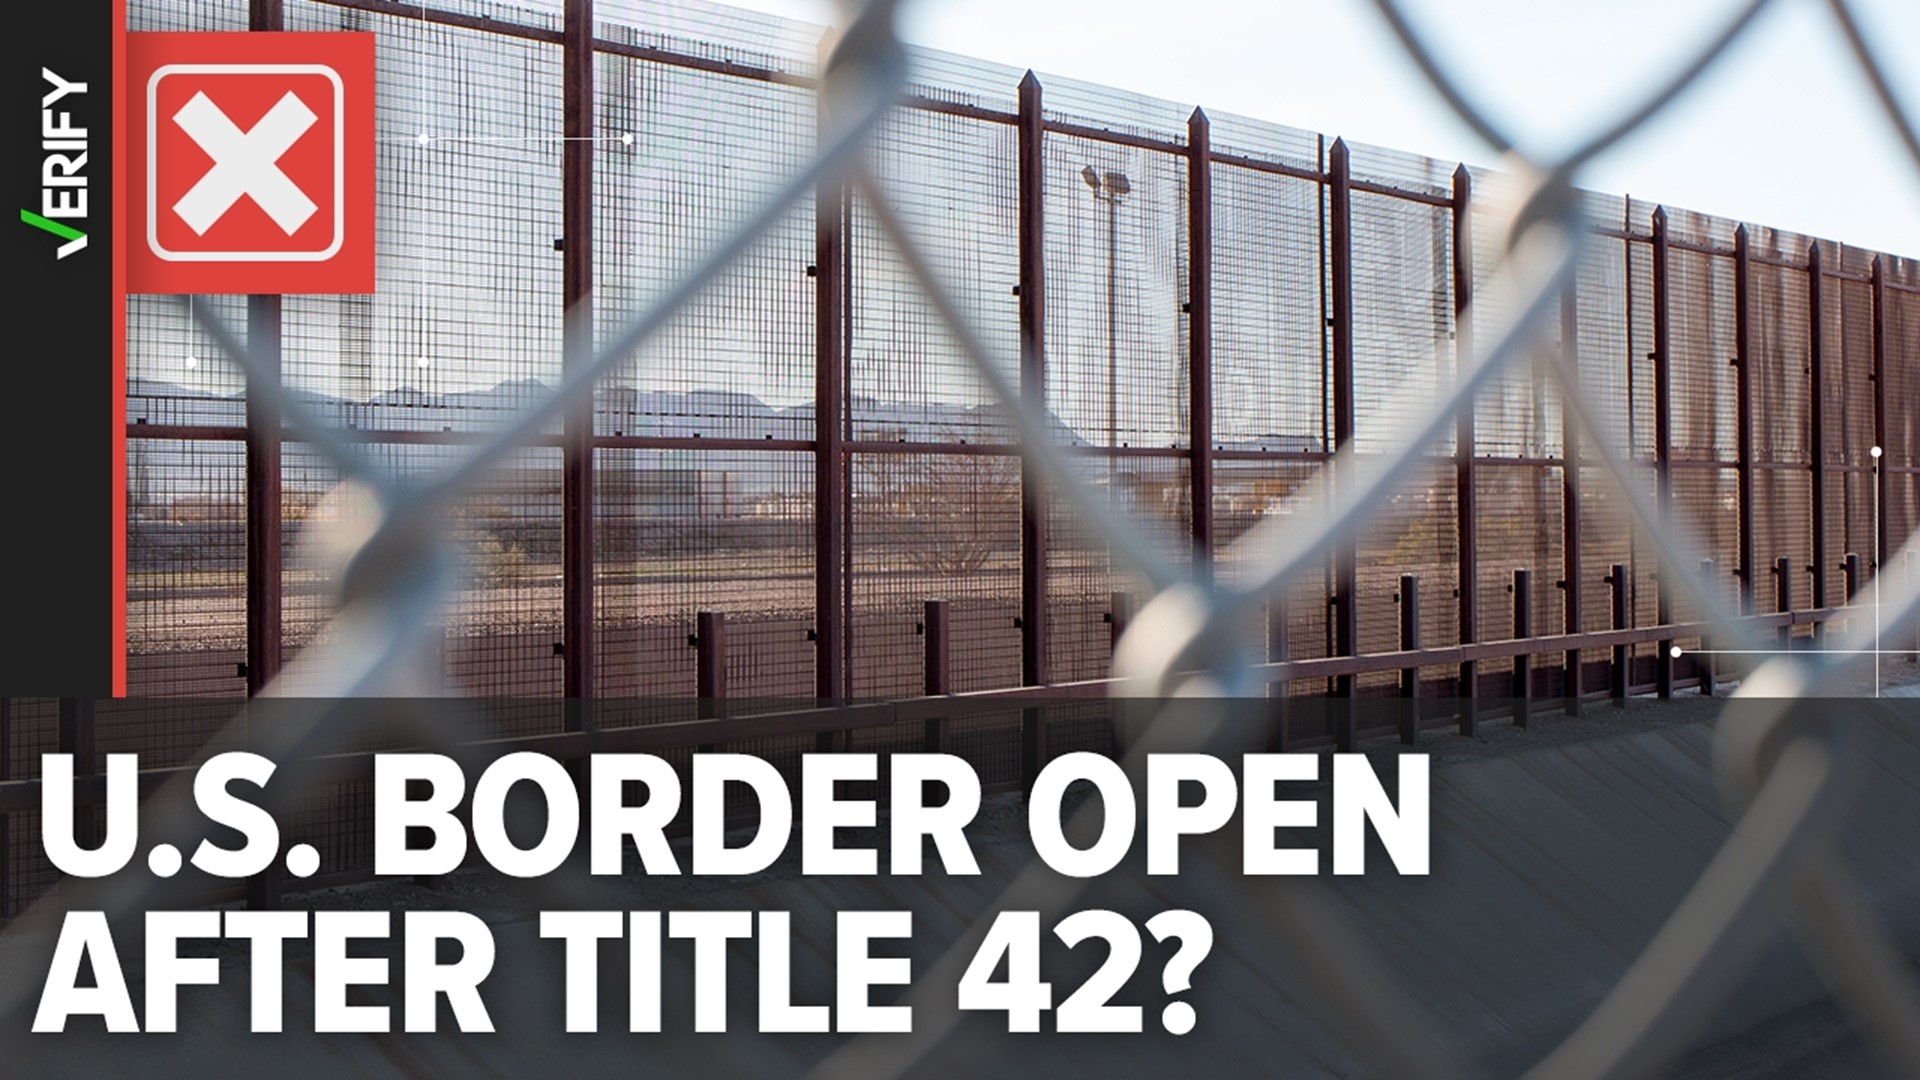 A border policy known as Title 42 expires on May 11. That means the U.S. will transition back to Title 8 immigration procedures outlined in federal law.